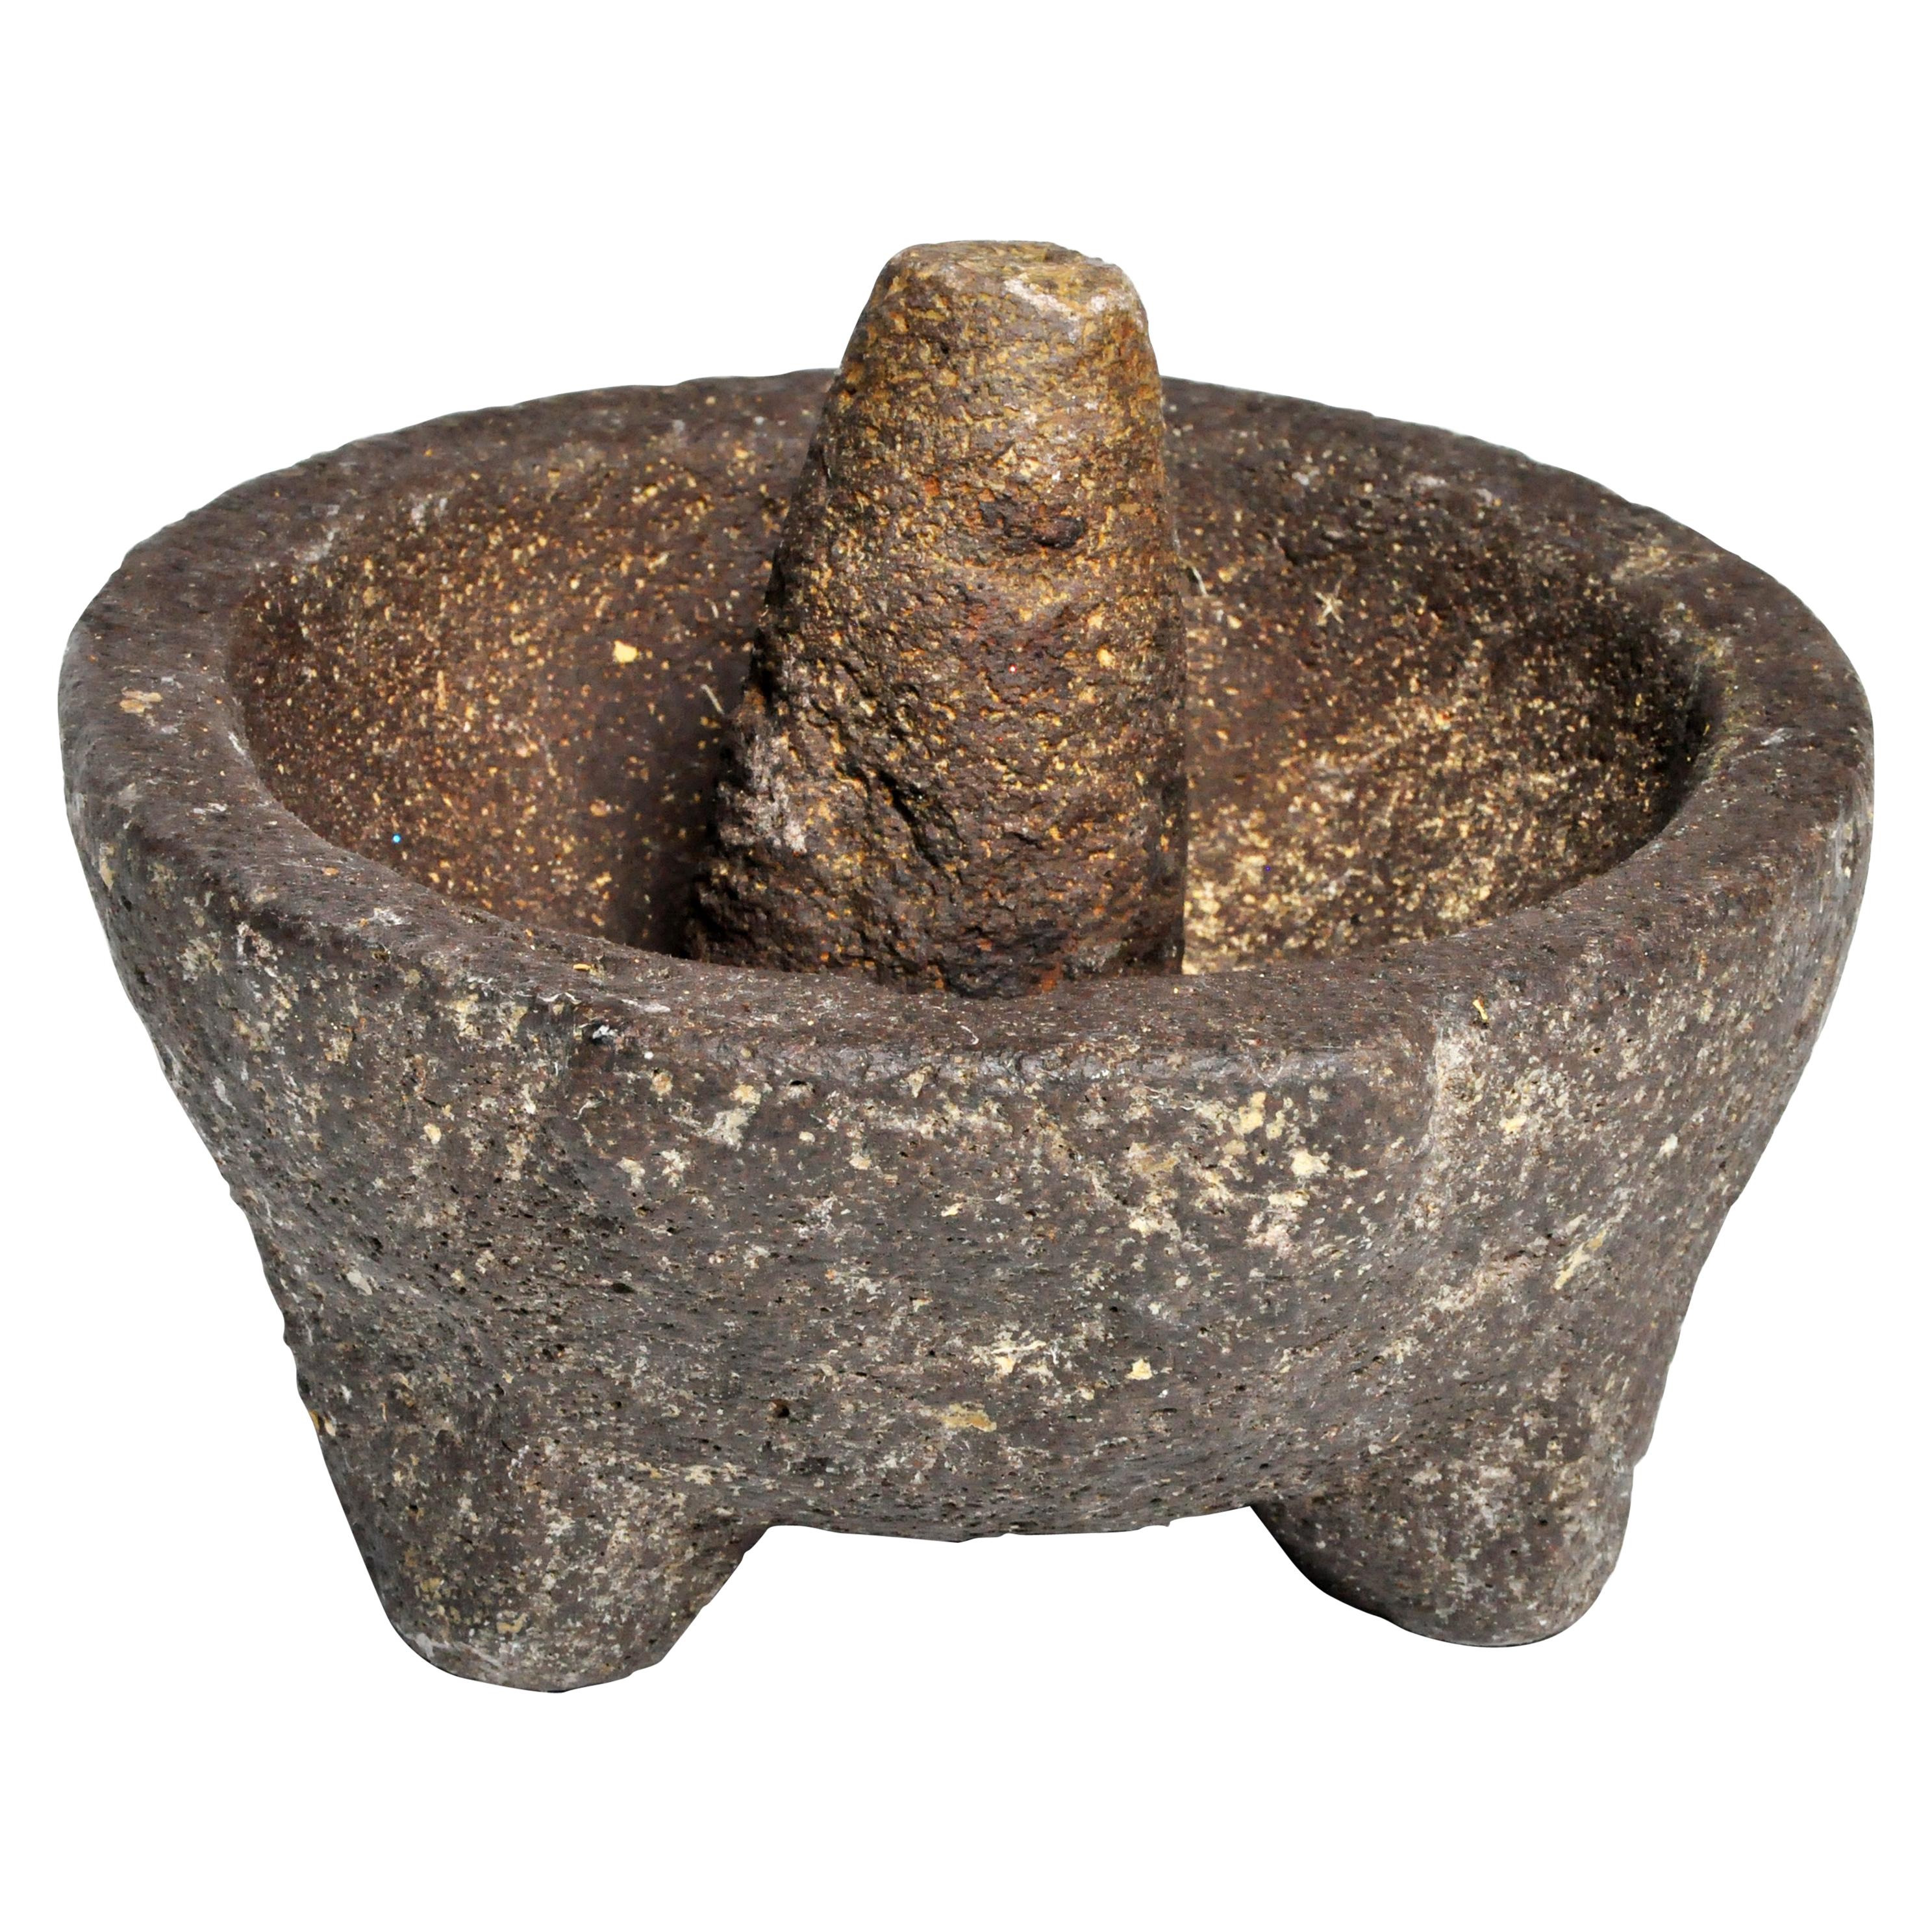 Stone Mortar with Pestle